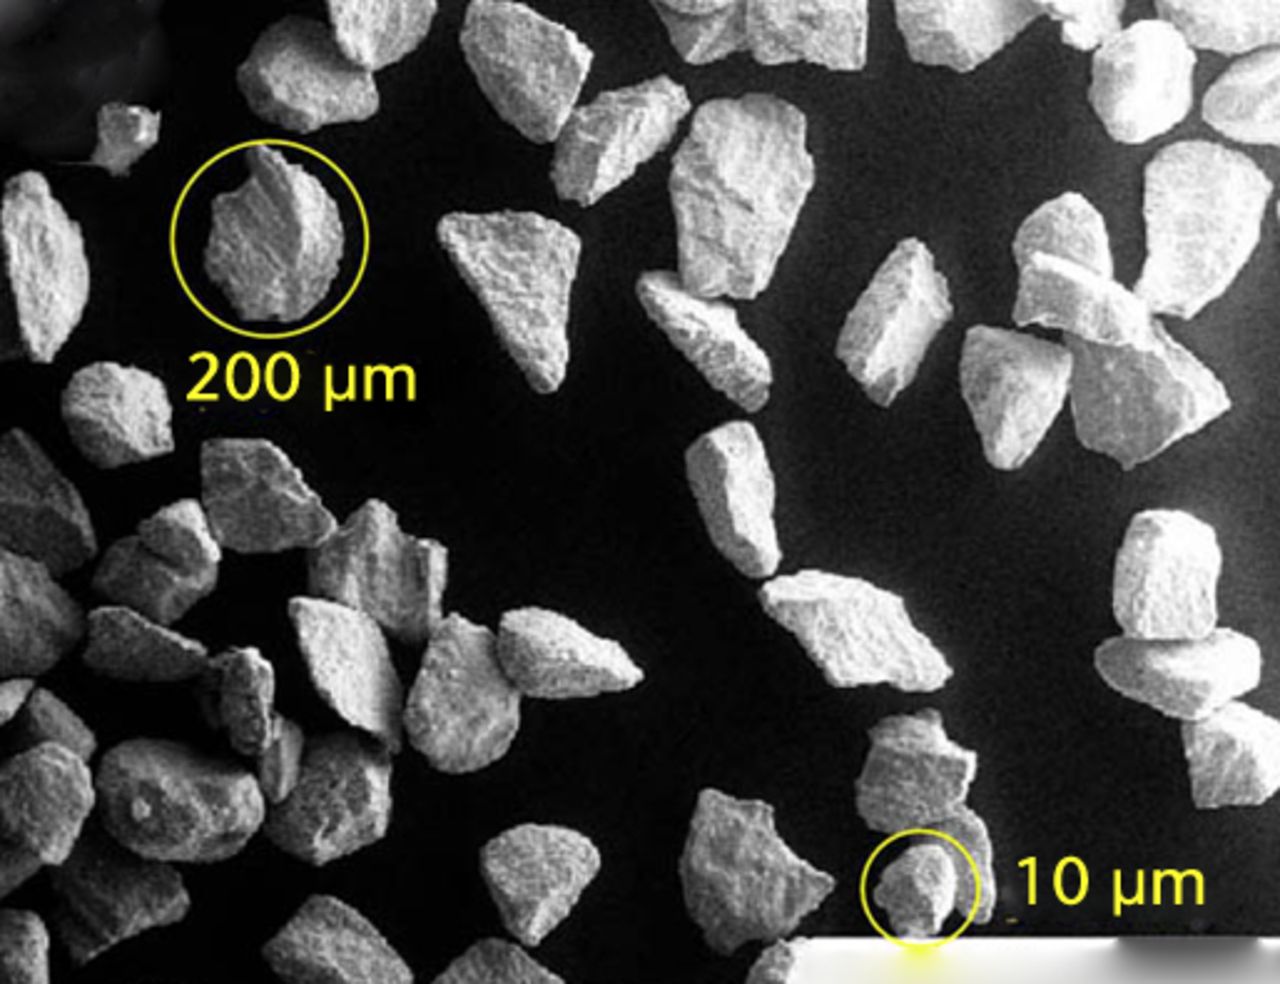 Figs. 2a - 2c 
            SEM imaging showed particulate
morphologies including a) cobalt–chrome beads (mag. × 1000), b)
titanium alloy particles (mag. × 100) and c) flakes of polymerised
cement (mag. × 100).
          